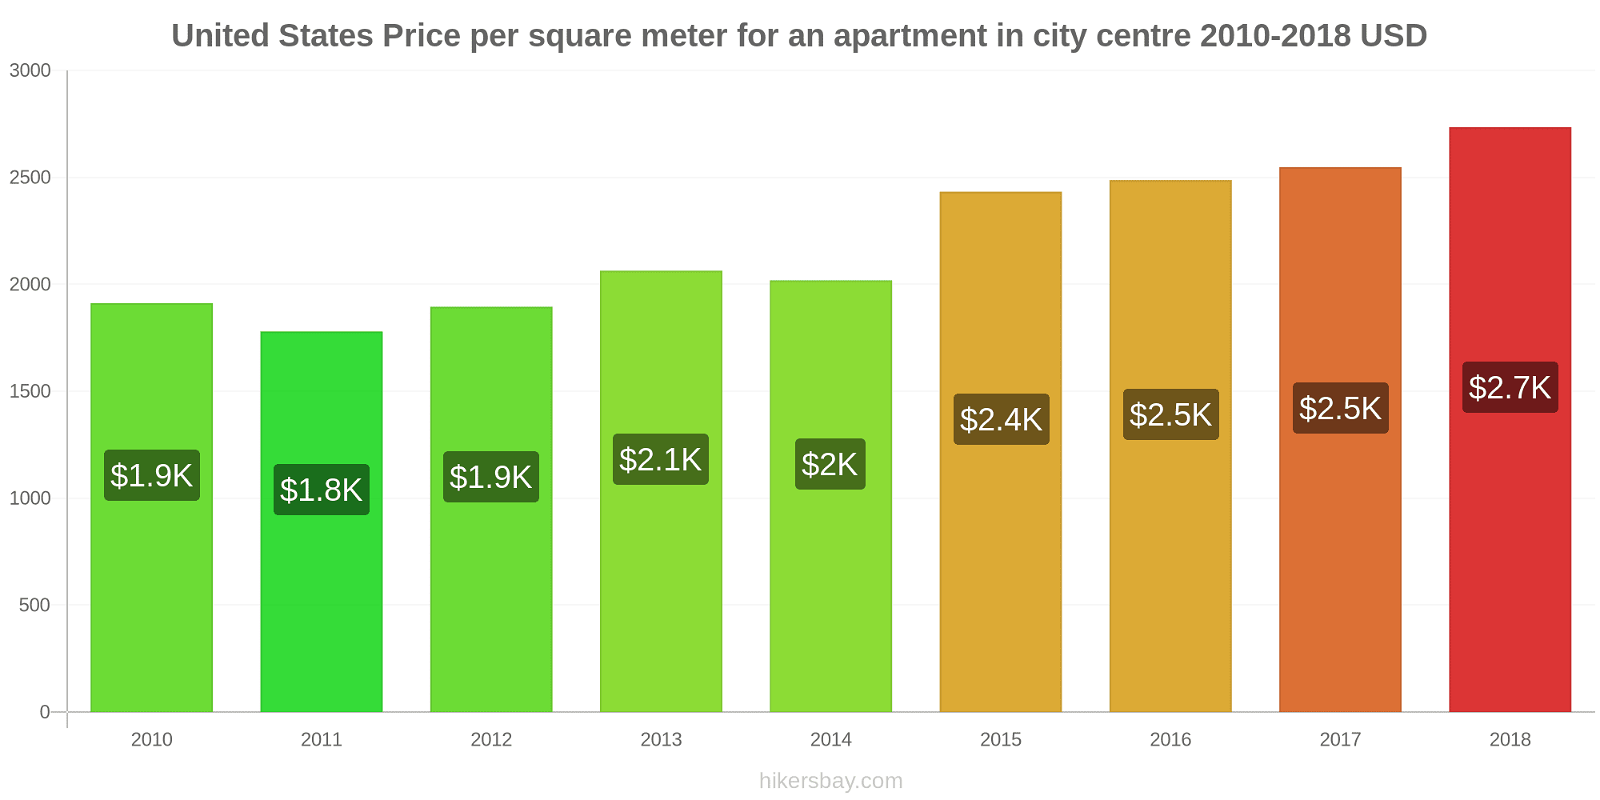 United States price changes Price per square meter for an apartment in the city center hikersbay.com